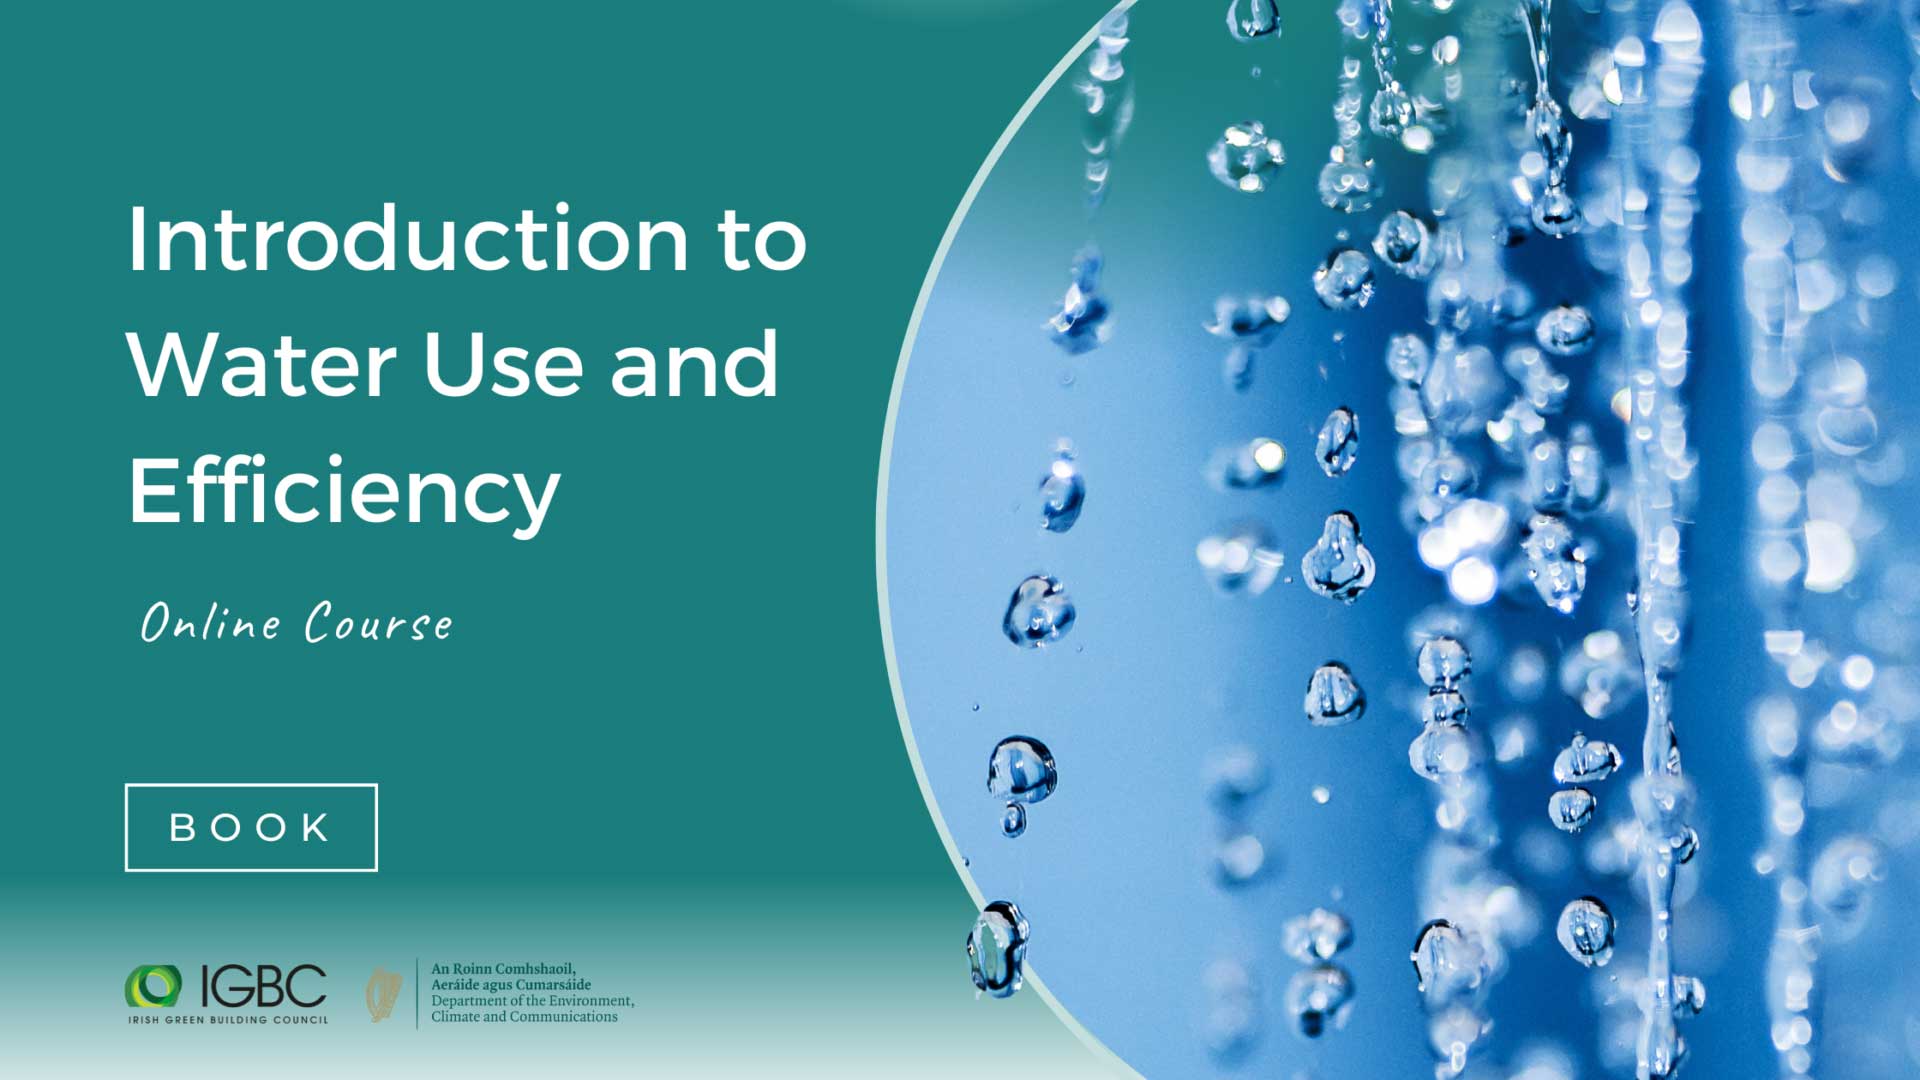 Introduction to Water Use and efficiency online training course